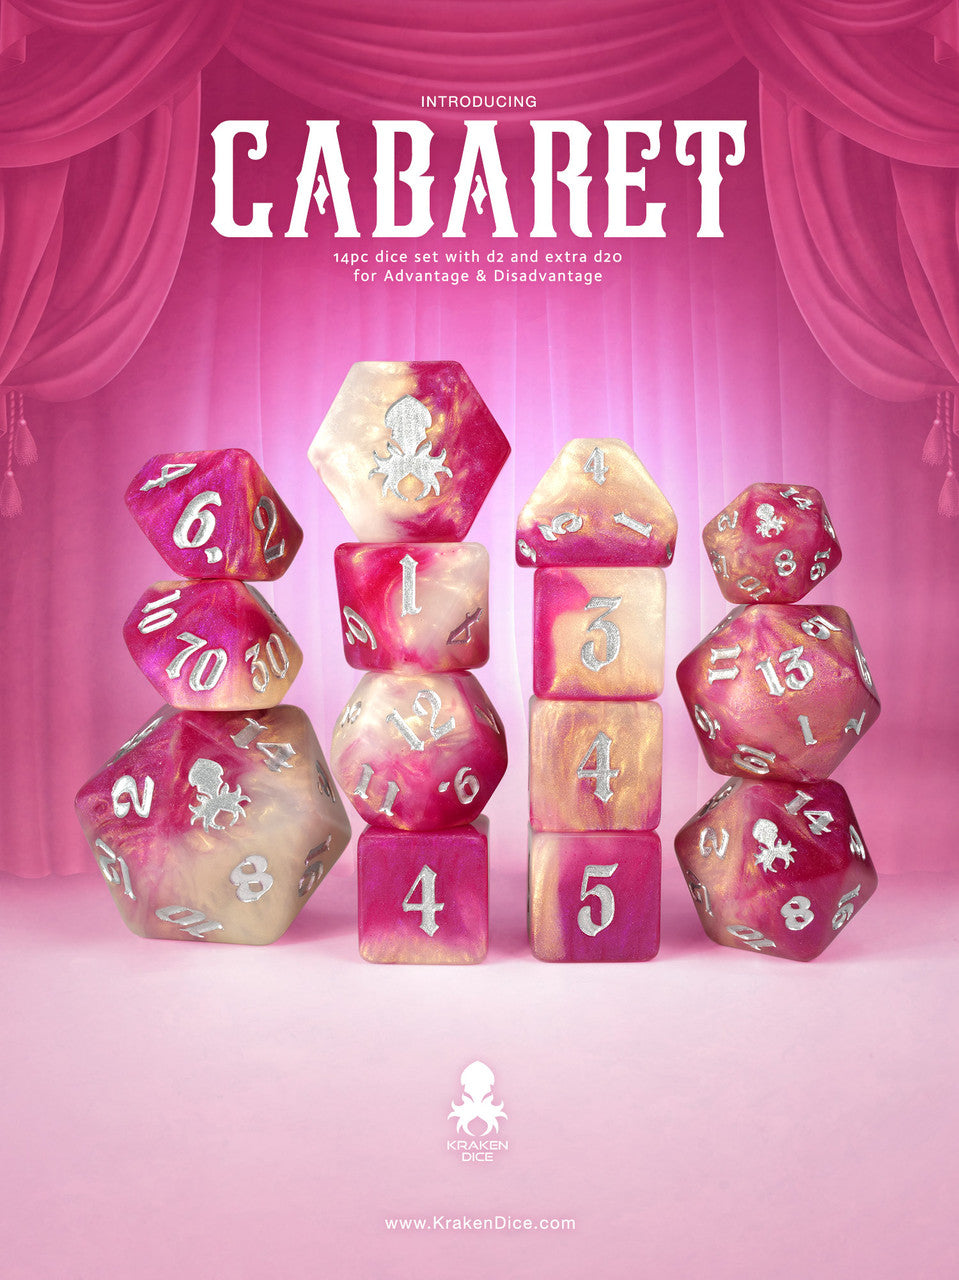 Cabaret 14pc Dice Set inked in Silver